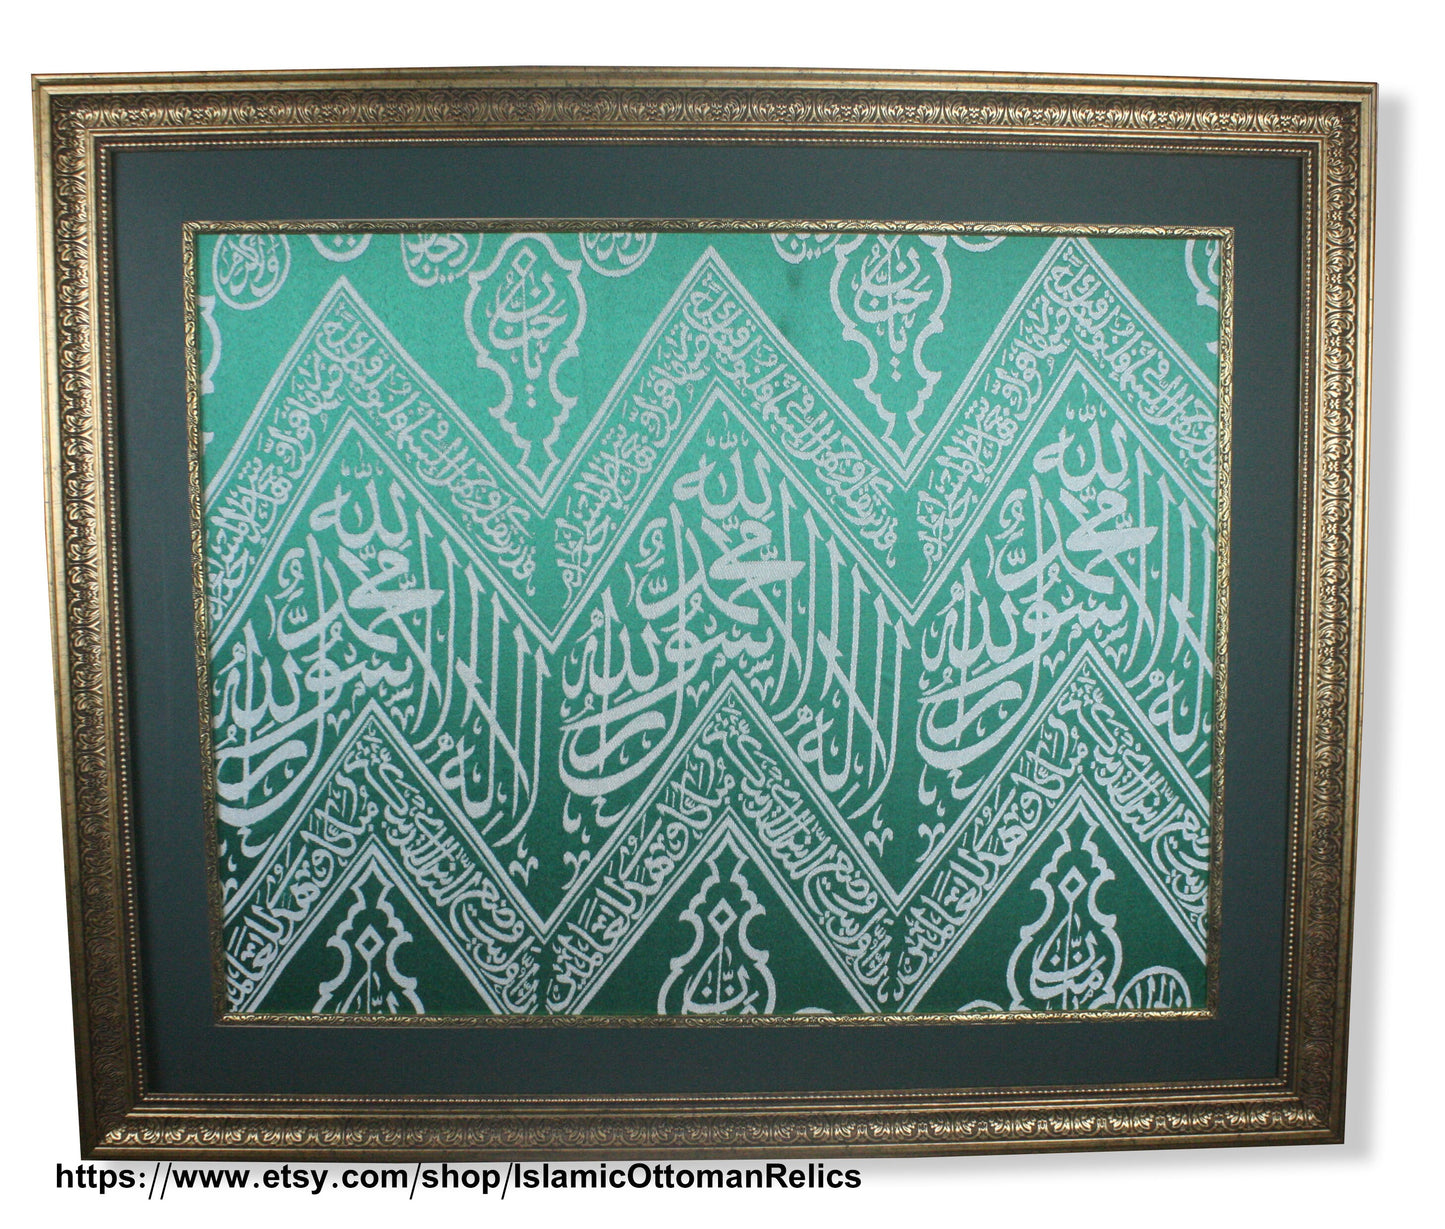 Holy Kaaba Inside Green Cover Cloth With Certificate / Housewarming Islam Home Living Room Decor / Precious Gift for Muslim